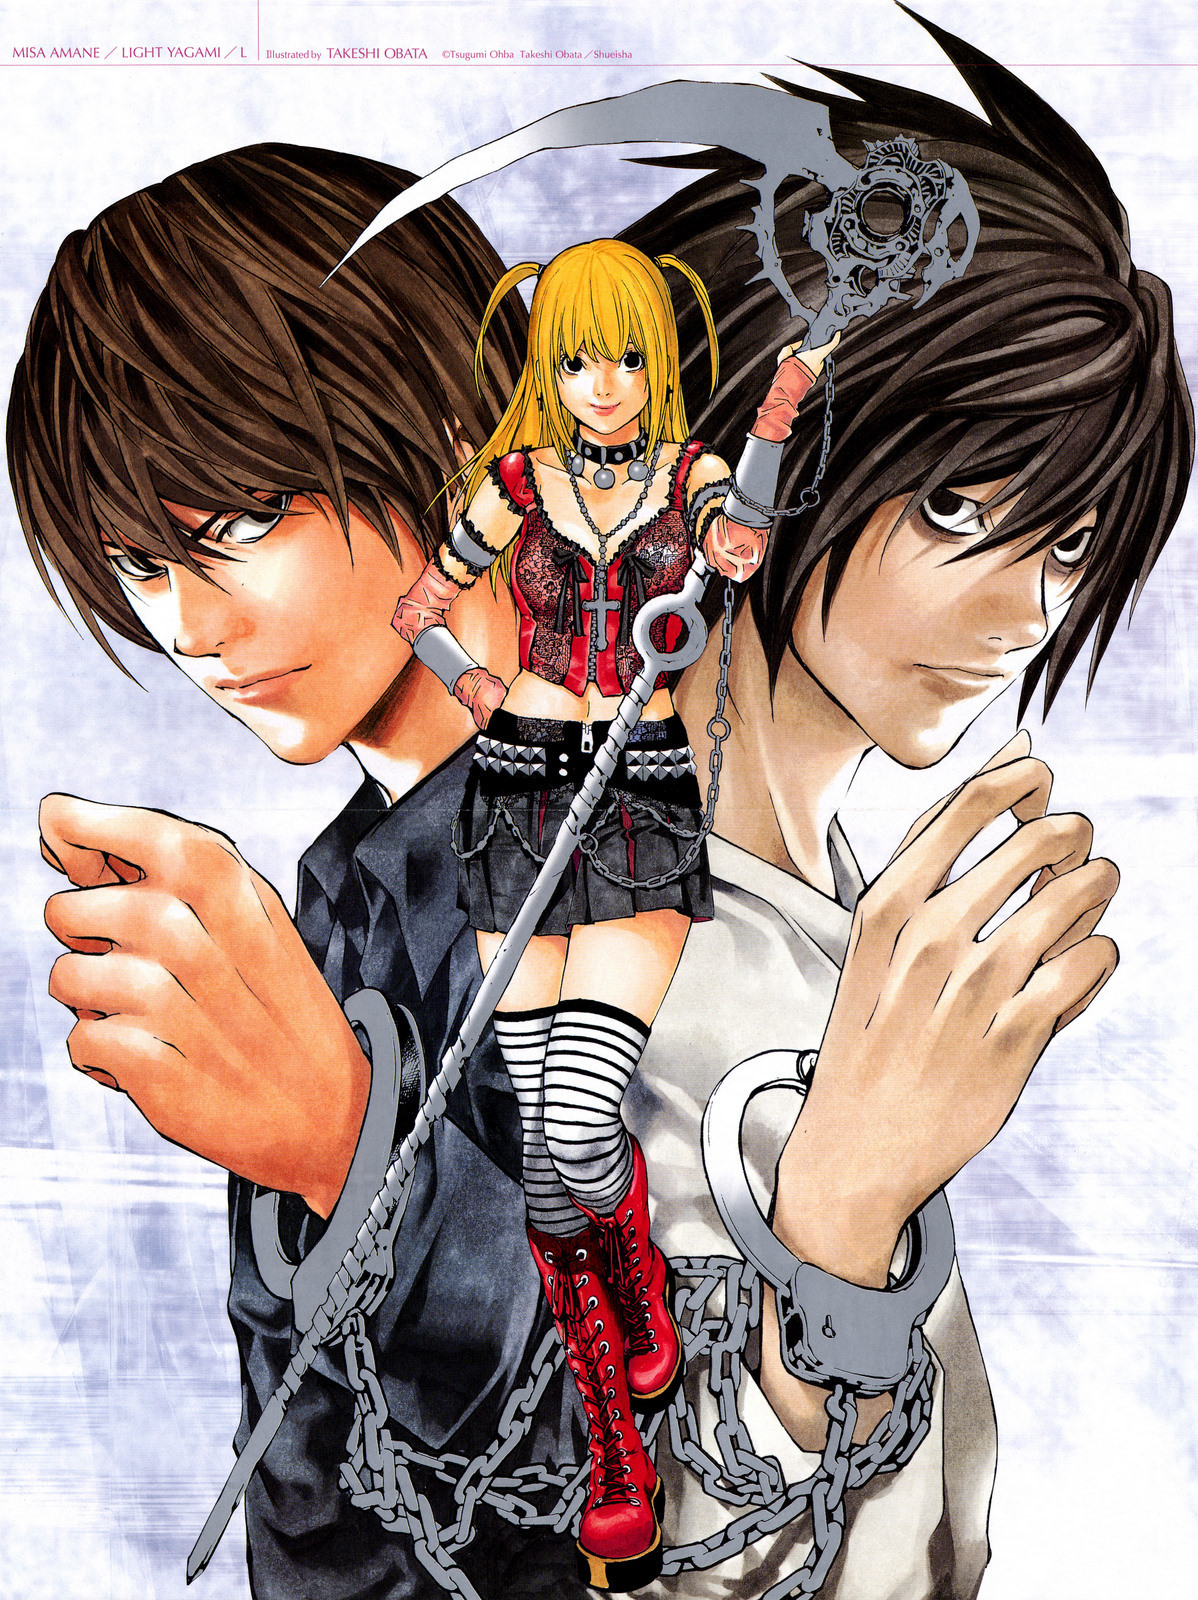 A character analysis of Light Yagami from Death Note